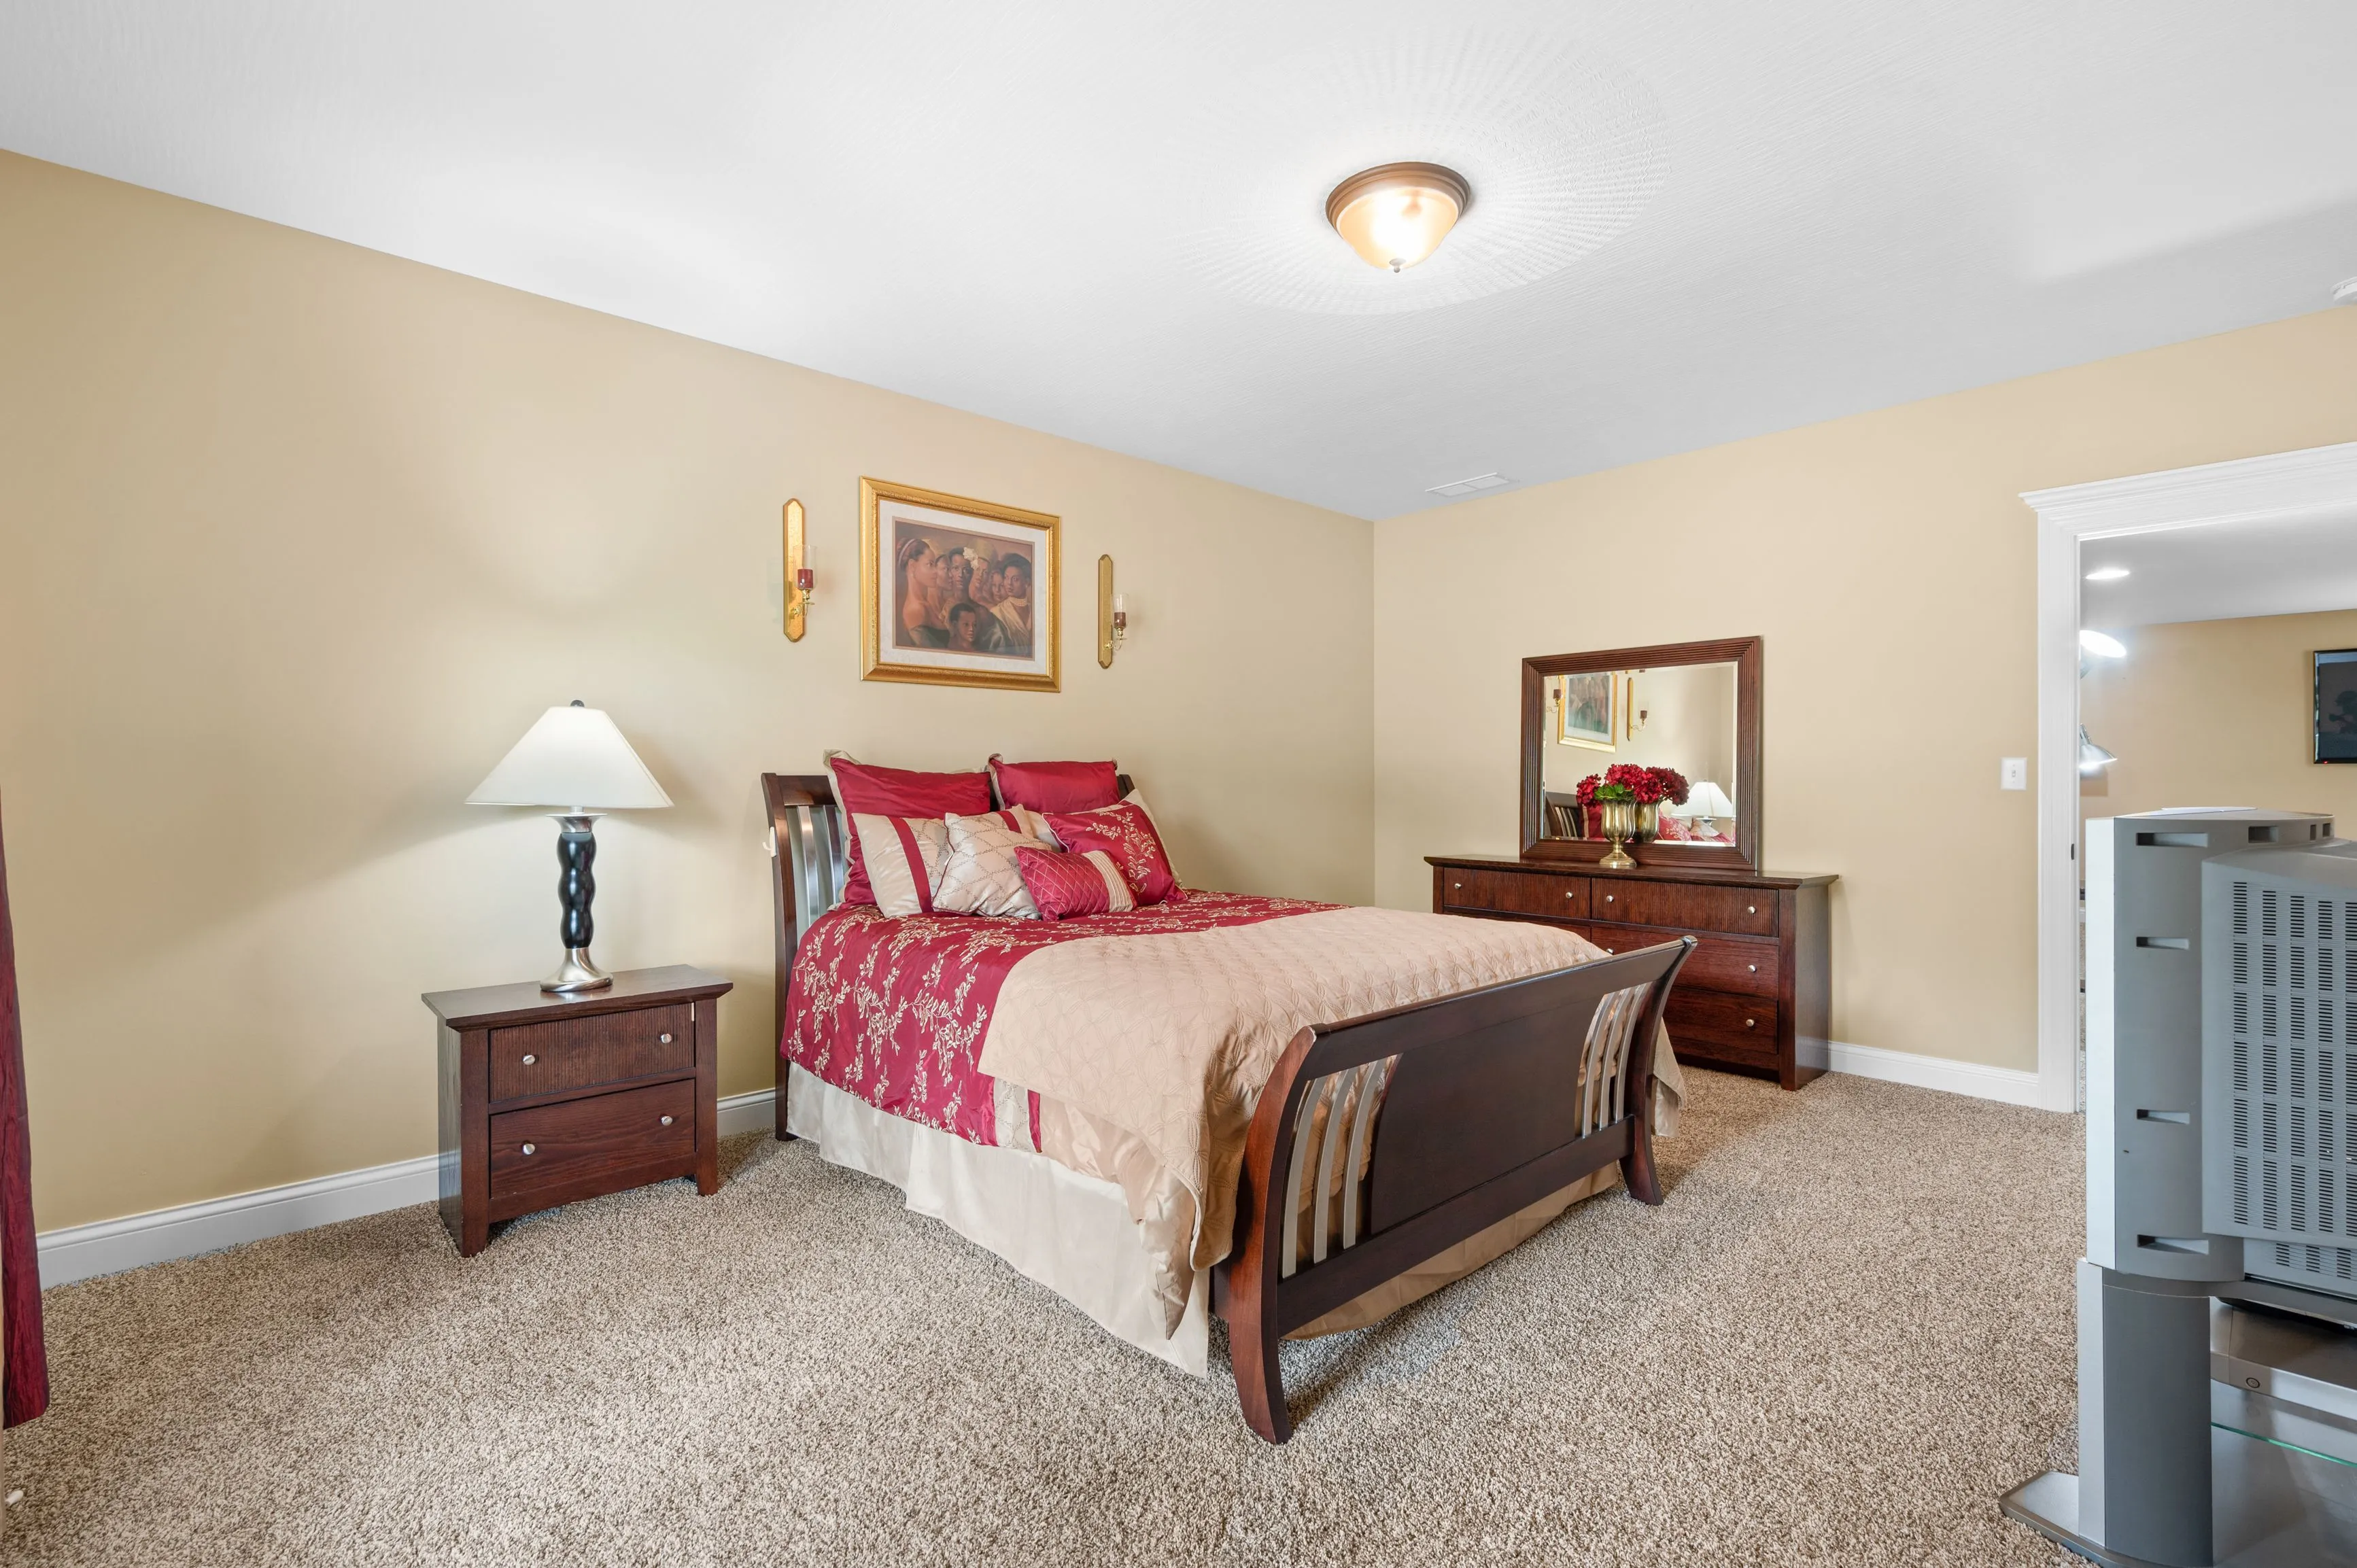 Cozy bedroom interior with a queen-sized bed adorned with red and beige bedding, matching wooden nightstand and dresser, a table lamp, wall art, plush carpeting, and a ceiling light fixture.